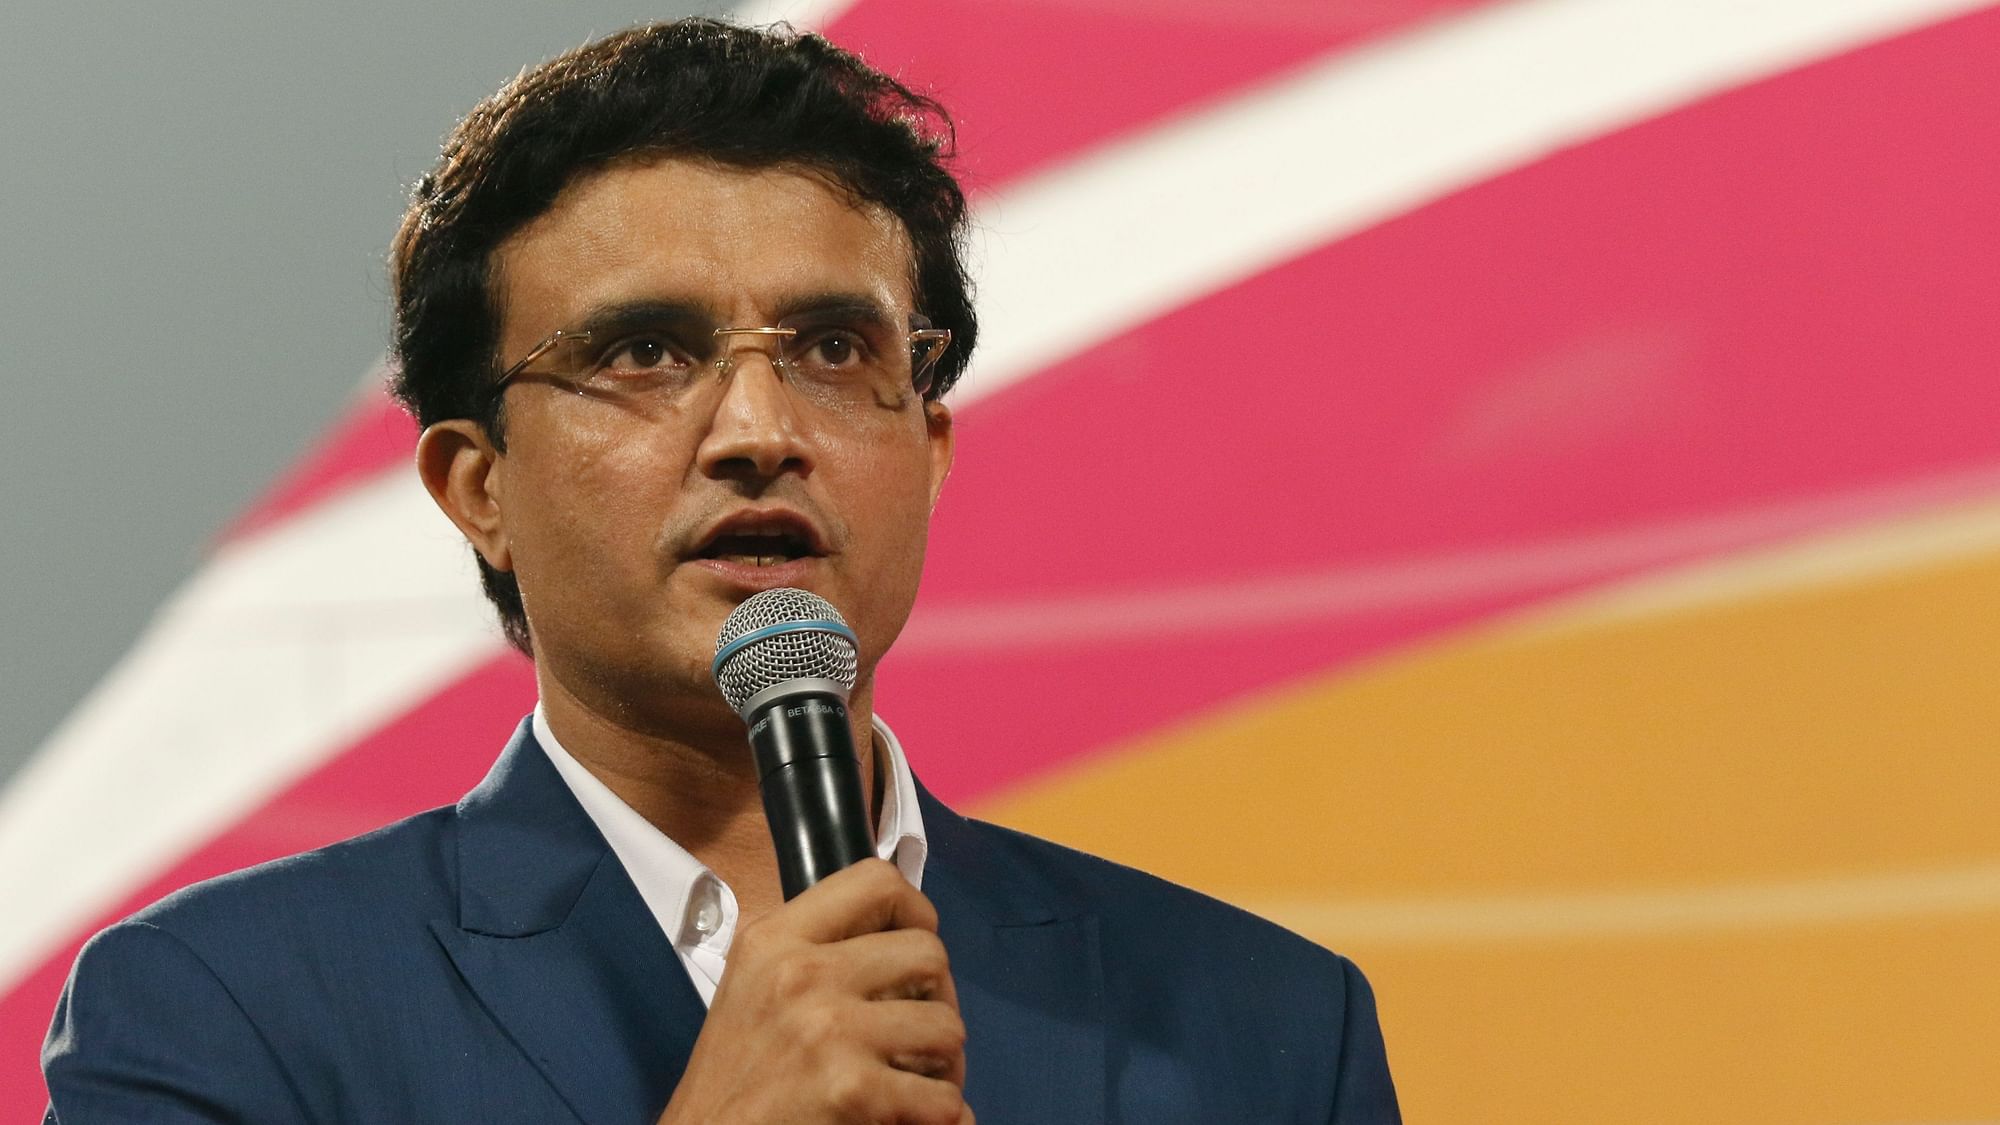 President Sourav Ganguly is explaining the whopping price for which Pat Cummins was bought by the Kolkata Knight Riders.